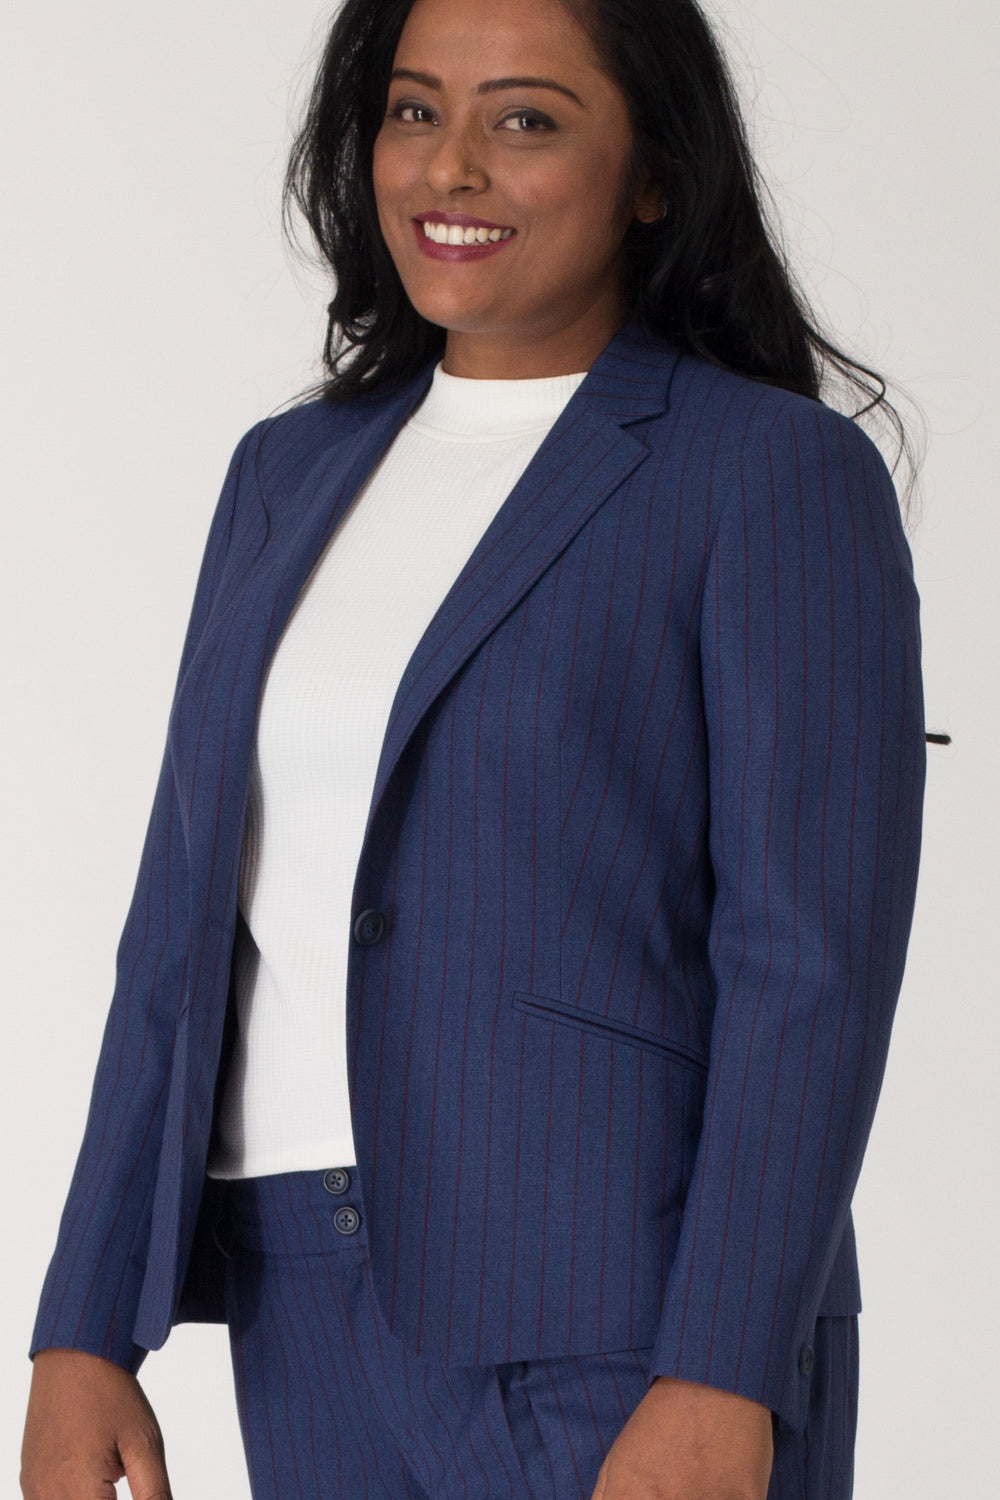 Blue Pinstripe Formal Blazer Pant Suits for Working Women. Shop for formal trousers, suits and workwear dresses at www.intermod.in